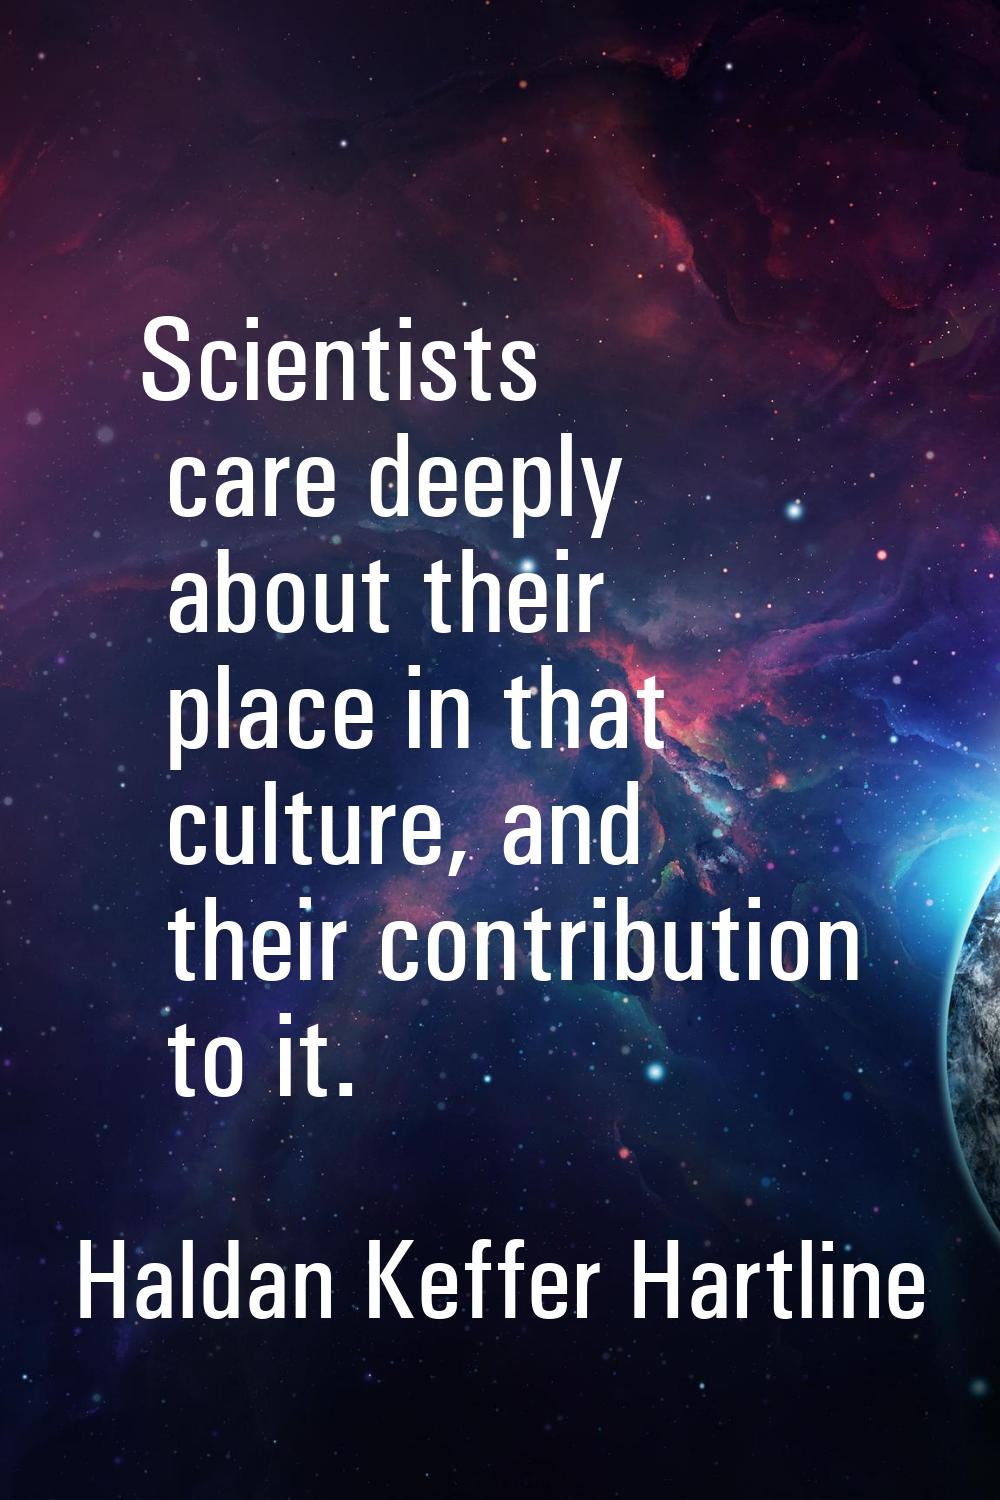 Scientists care deeply about their place in that culture, and their contribution to it.